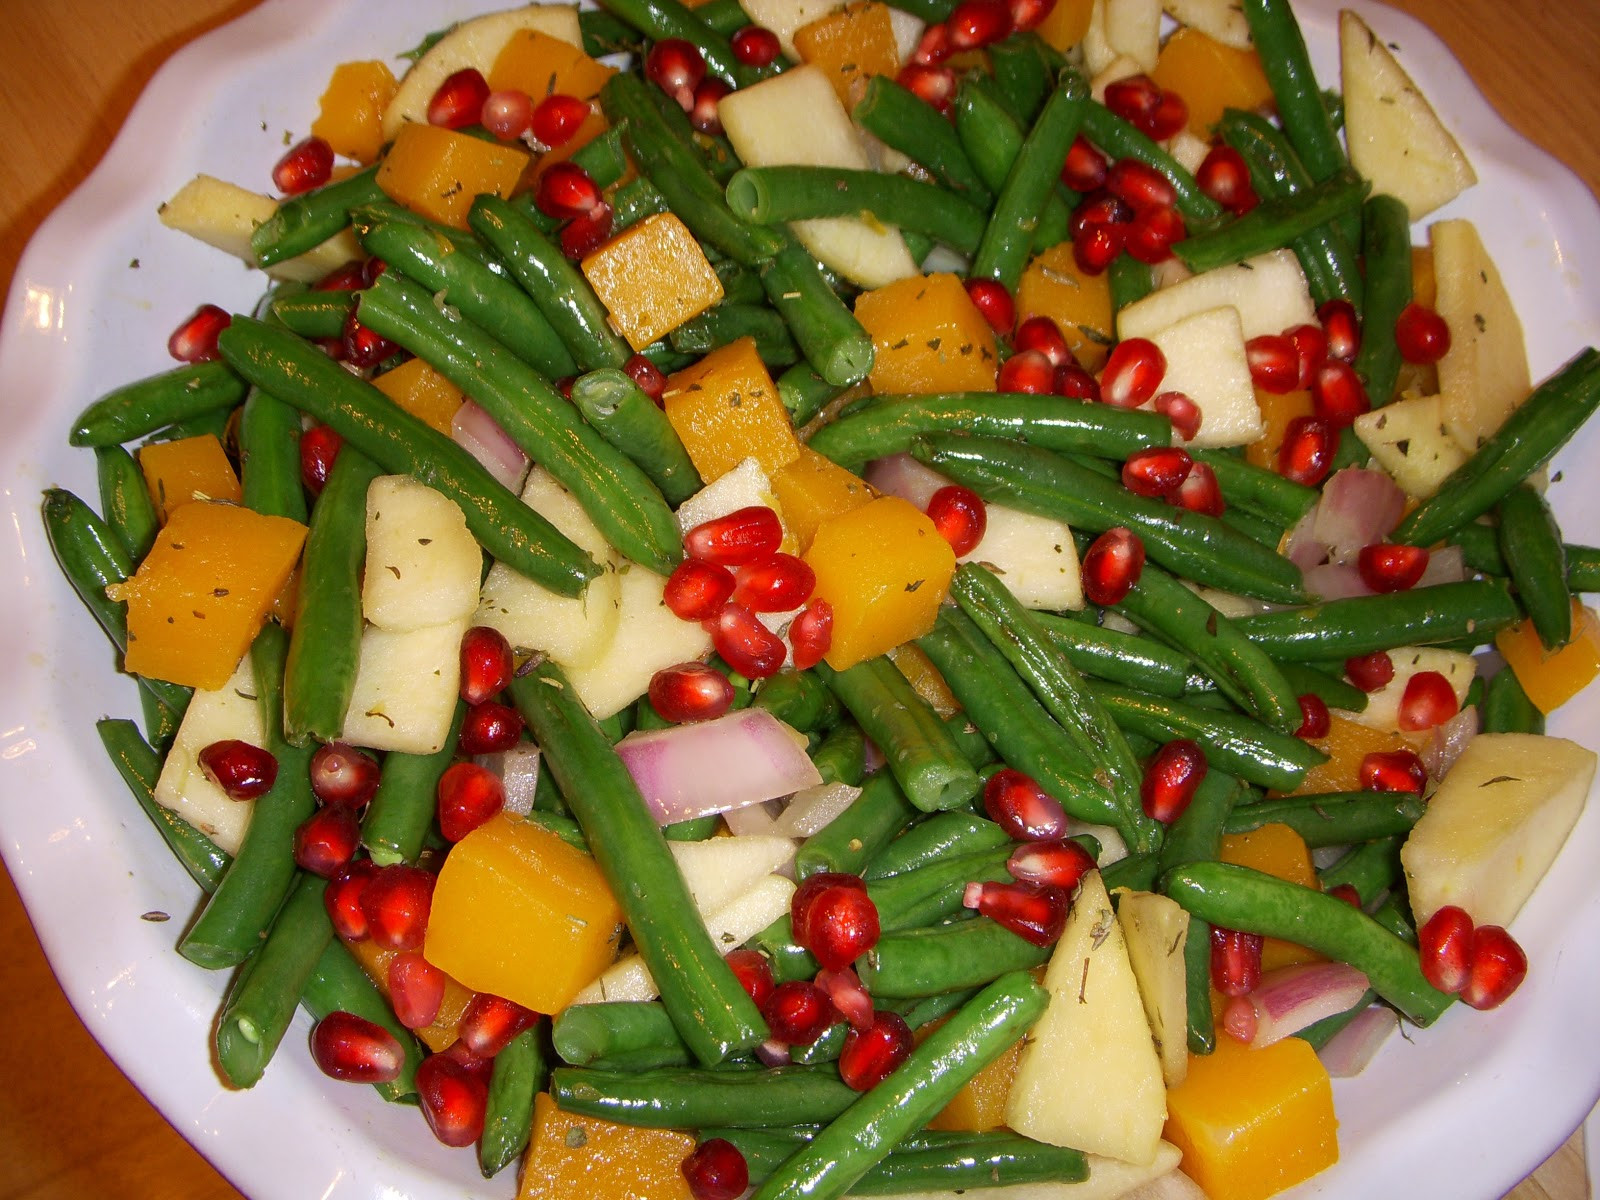 Vegetable Side Dishes For Christmas
 You Can t Eat What The Best Side to Fall For